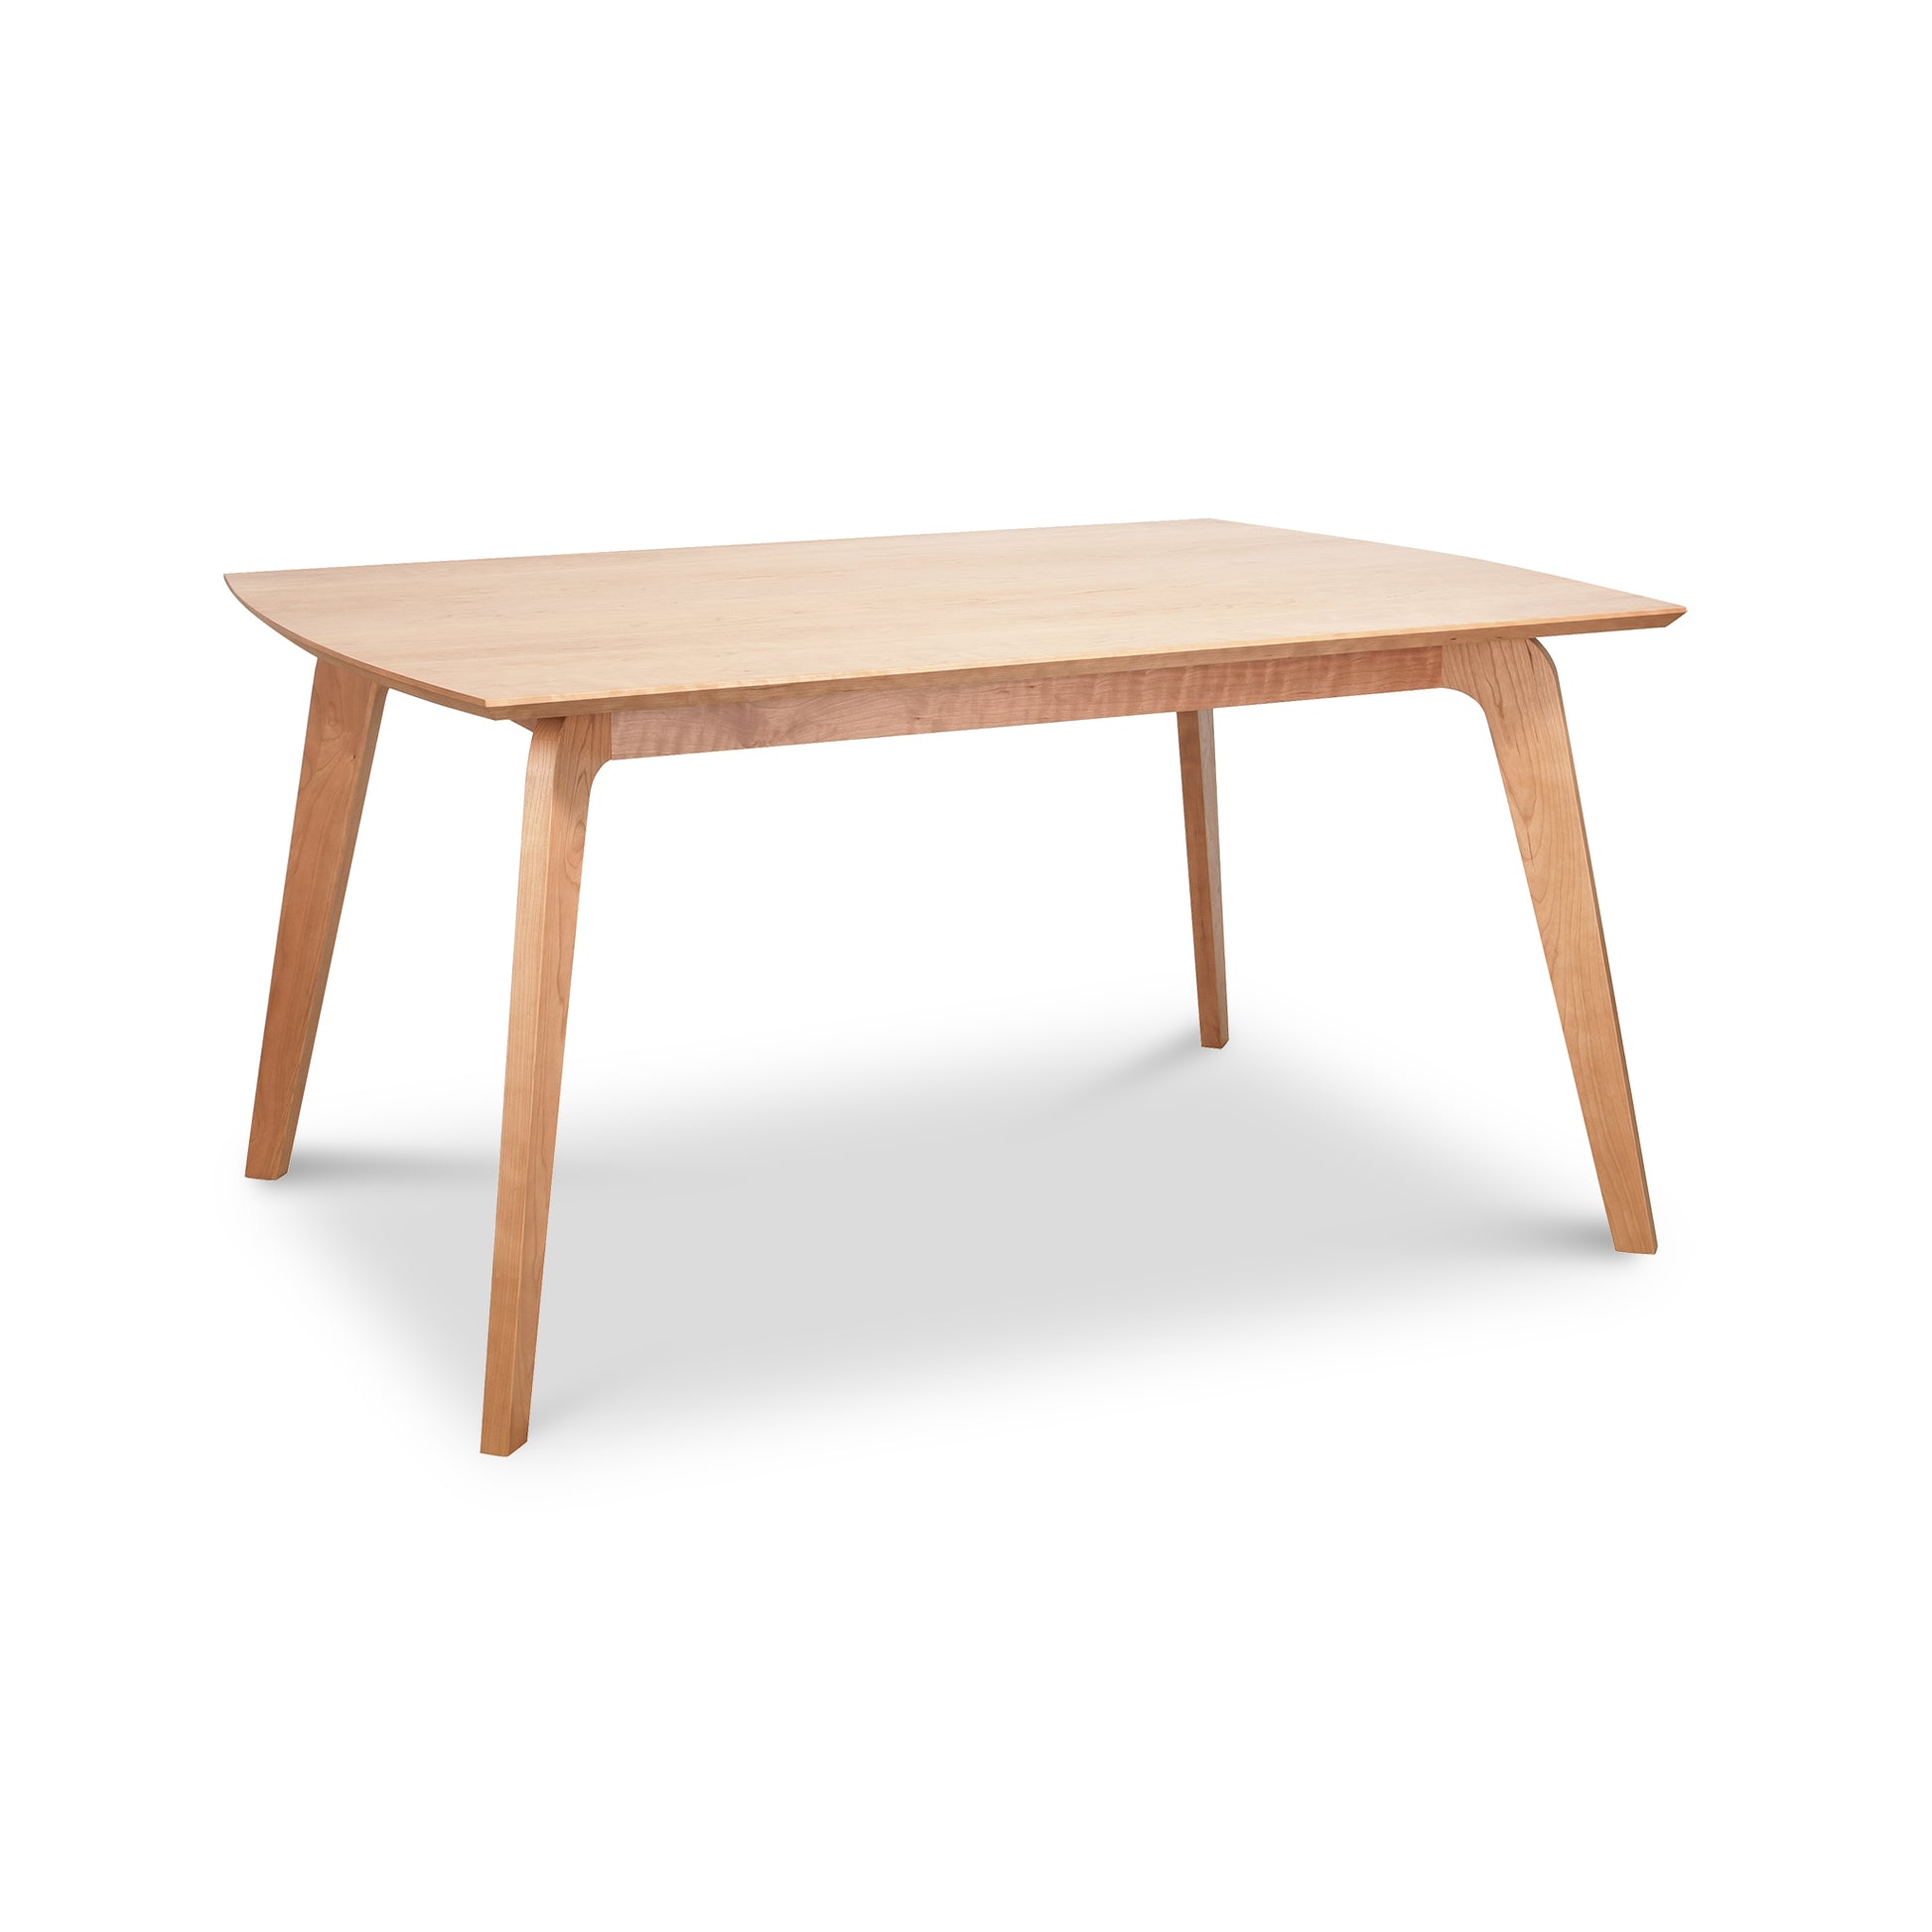 Updated description: A Brighton Solid-Top Table by Lyndon Furniture, representing 20th century furniture design, with a wooden top.